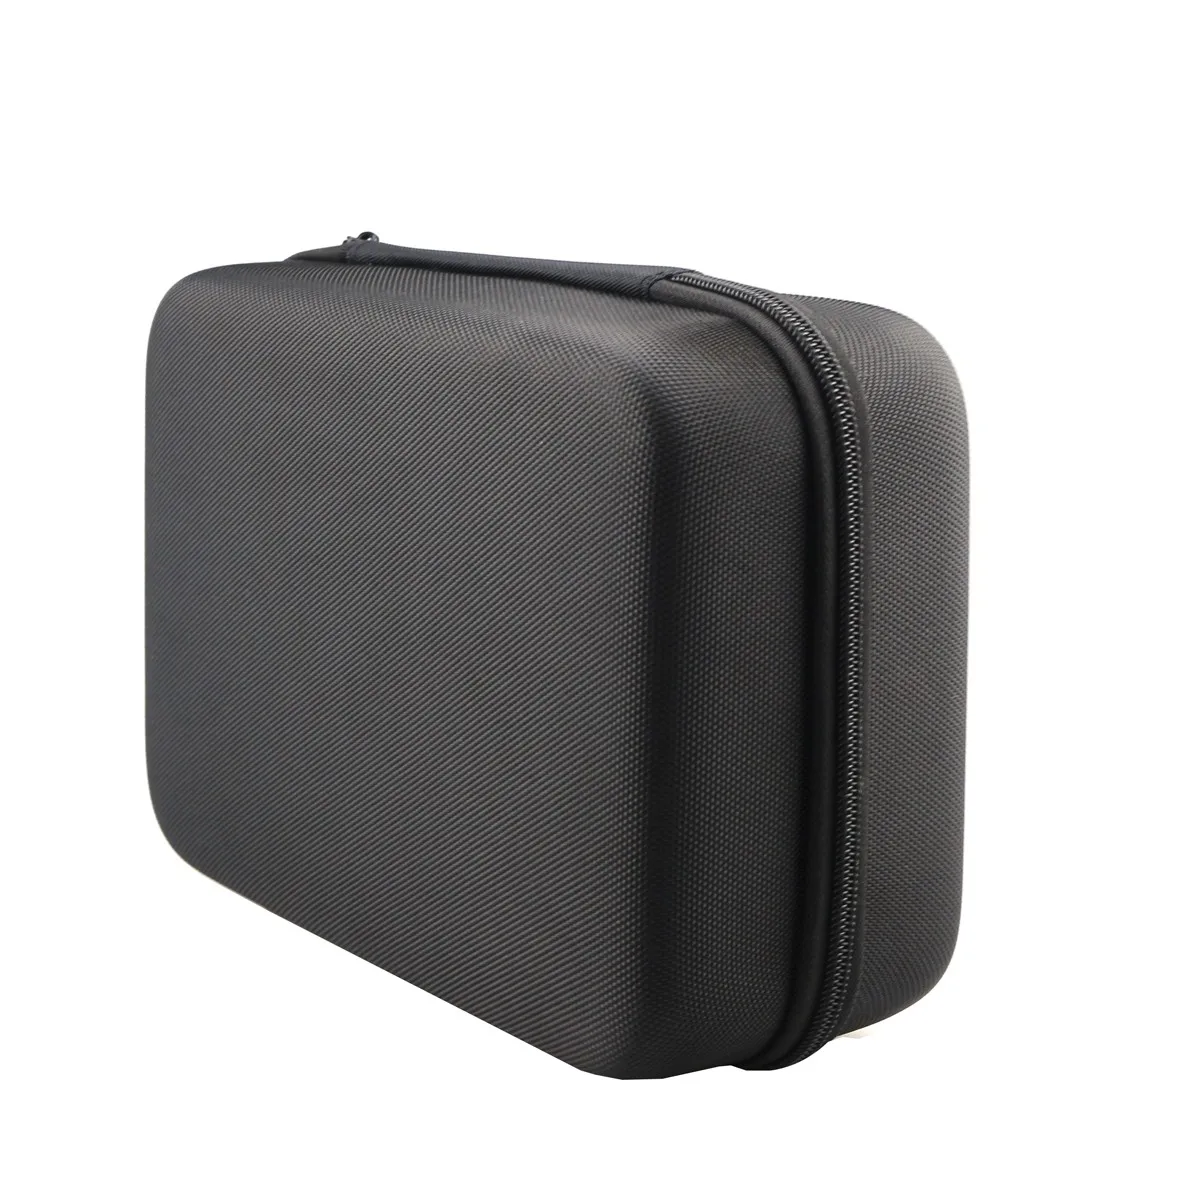 Travel Carry Case For Omron 5 Series BP5250 BP7250 Blood Pressure Monitor Wireless Upper Arm Cuff Digital Suitcase Storage Bag